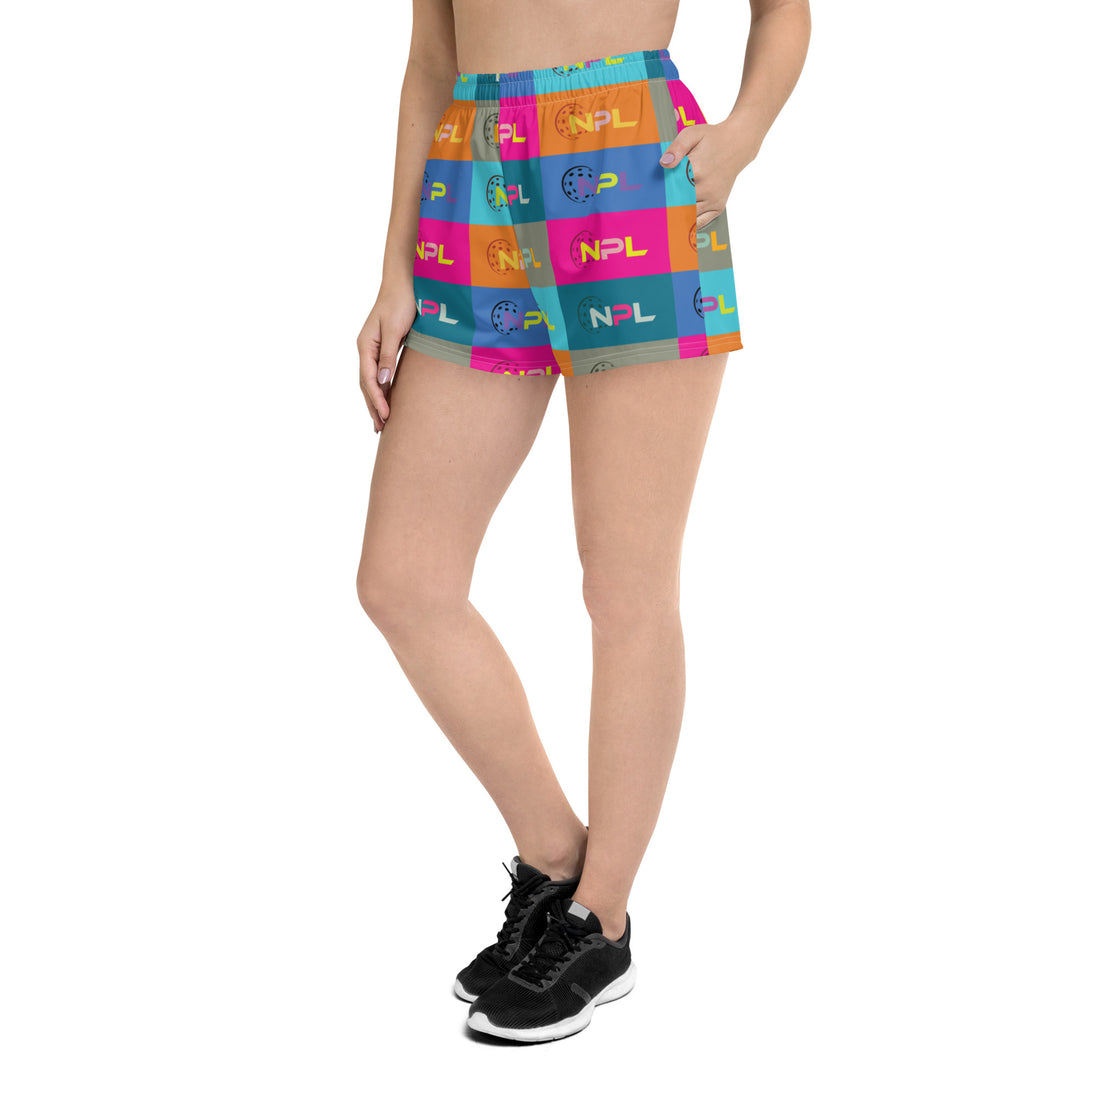 NPL™ Pop-Art Shorts with Liner for Women - Multi-Color